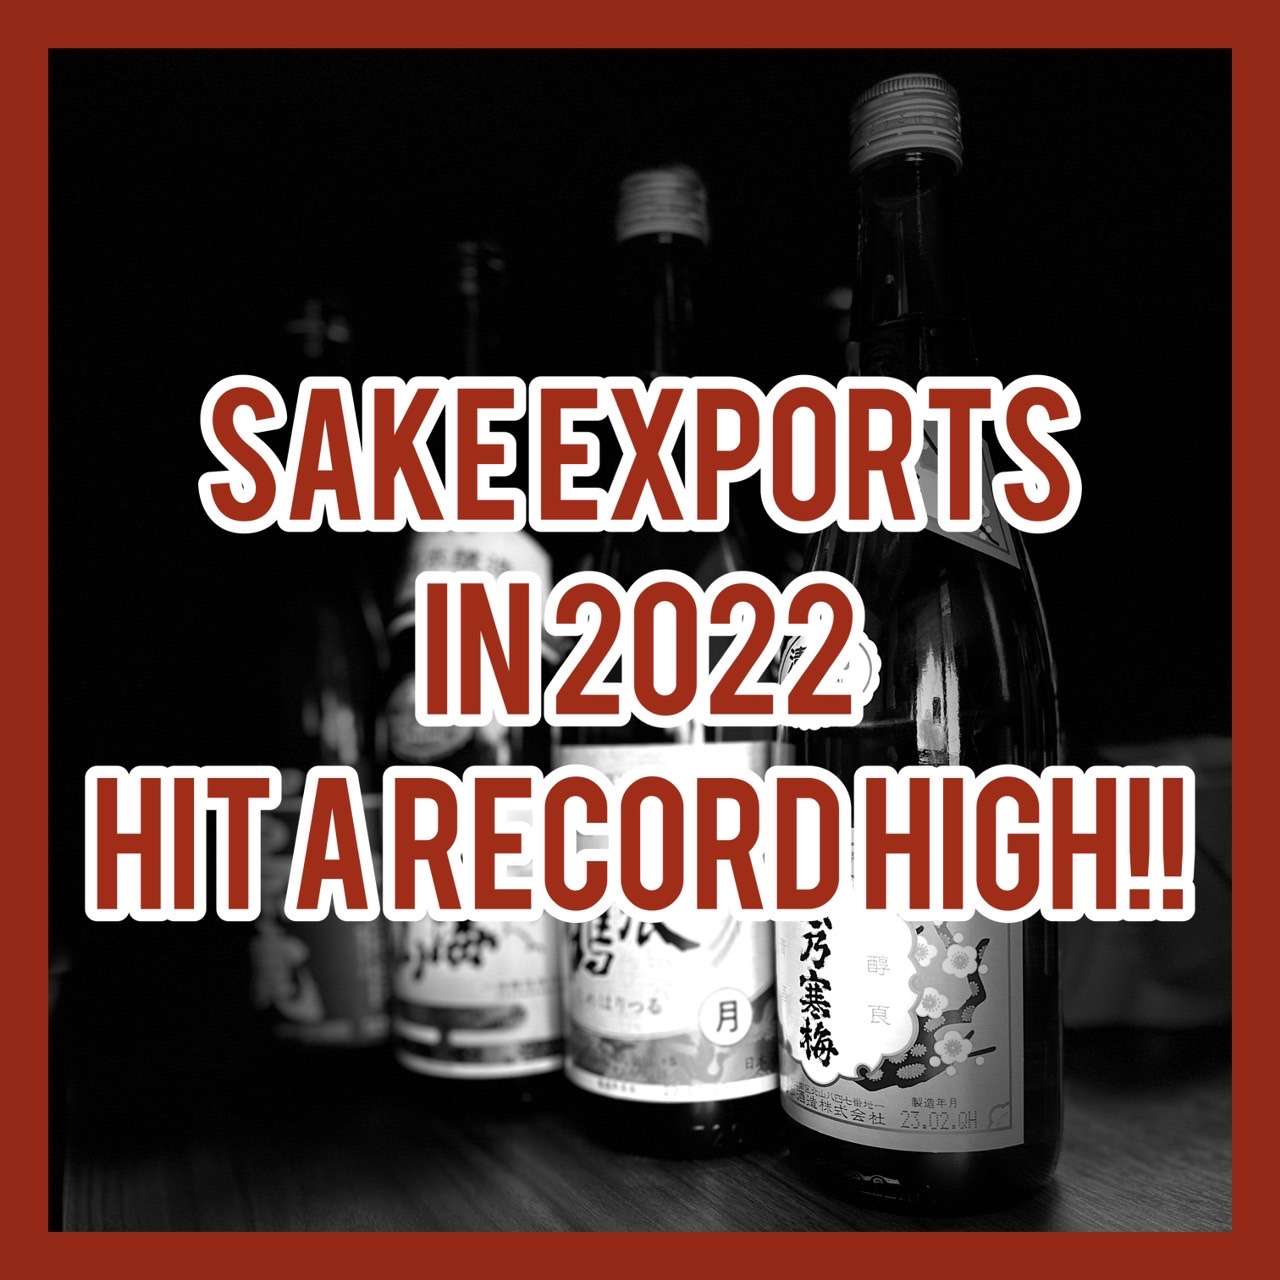 Sake exports in 2022 hit a record high